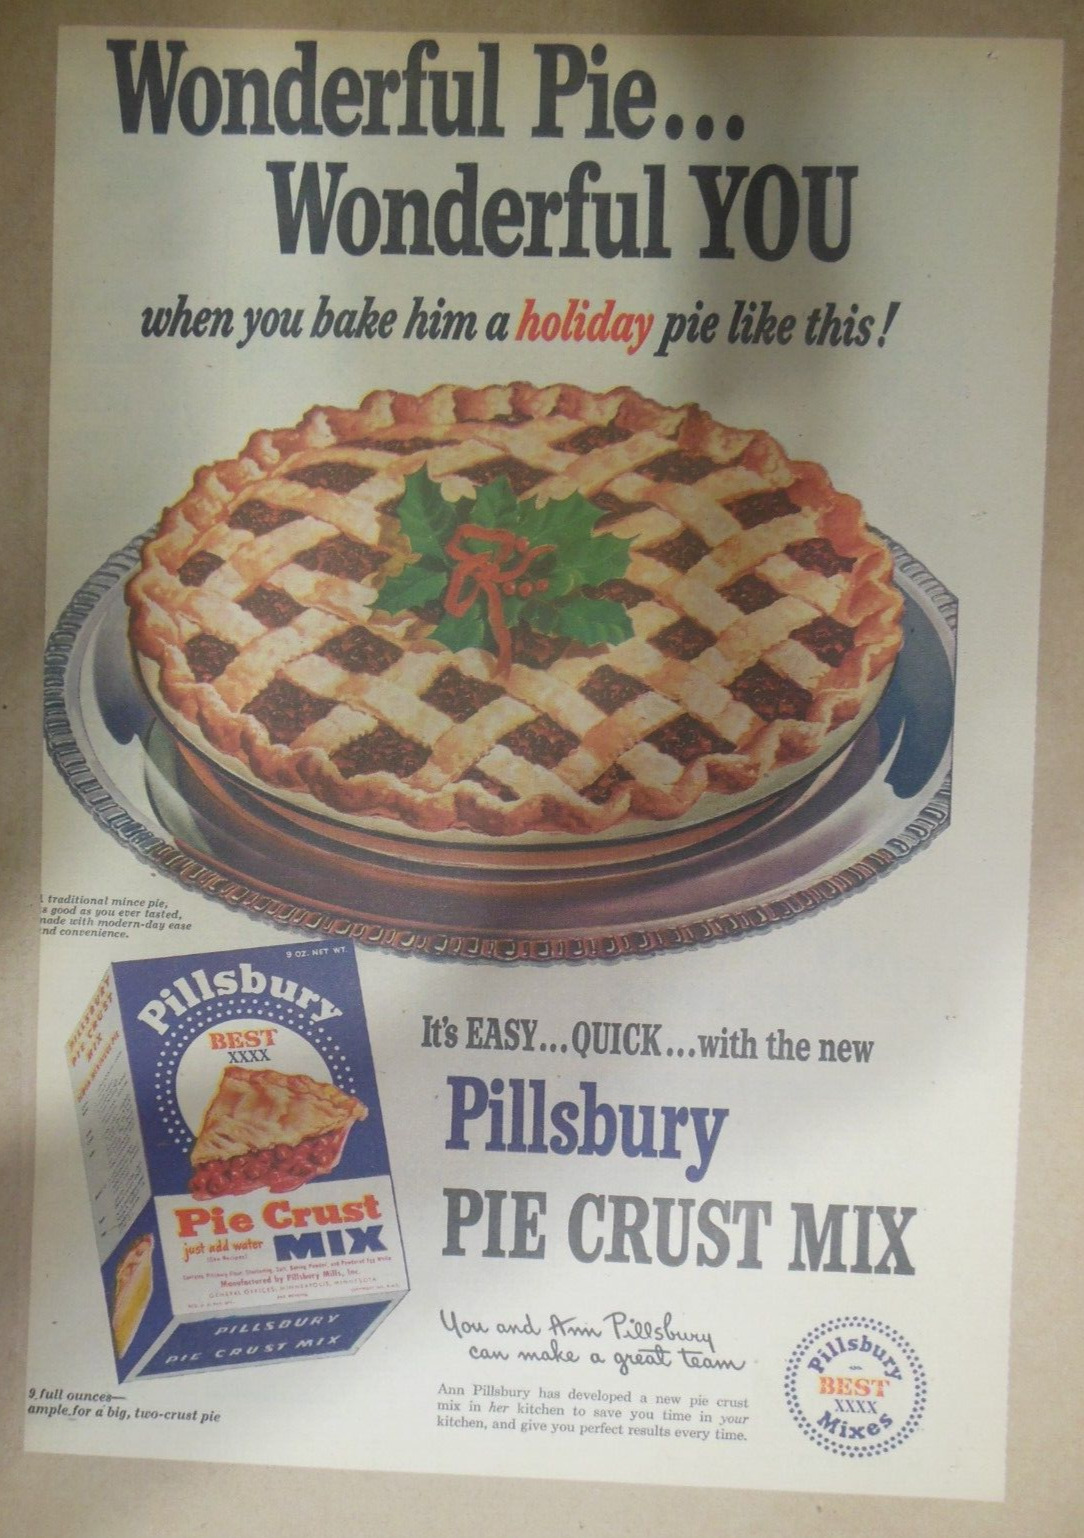 Pillsbury\'s Pie Crust Ad: Traditional Mince Pie from 1940\'s Size: 11 x 15 inches